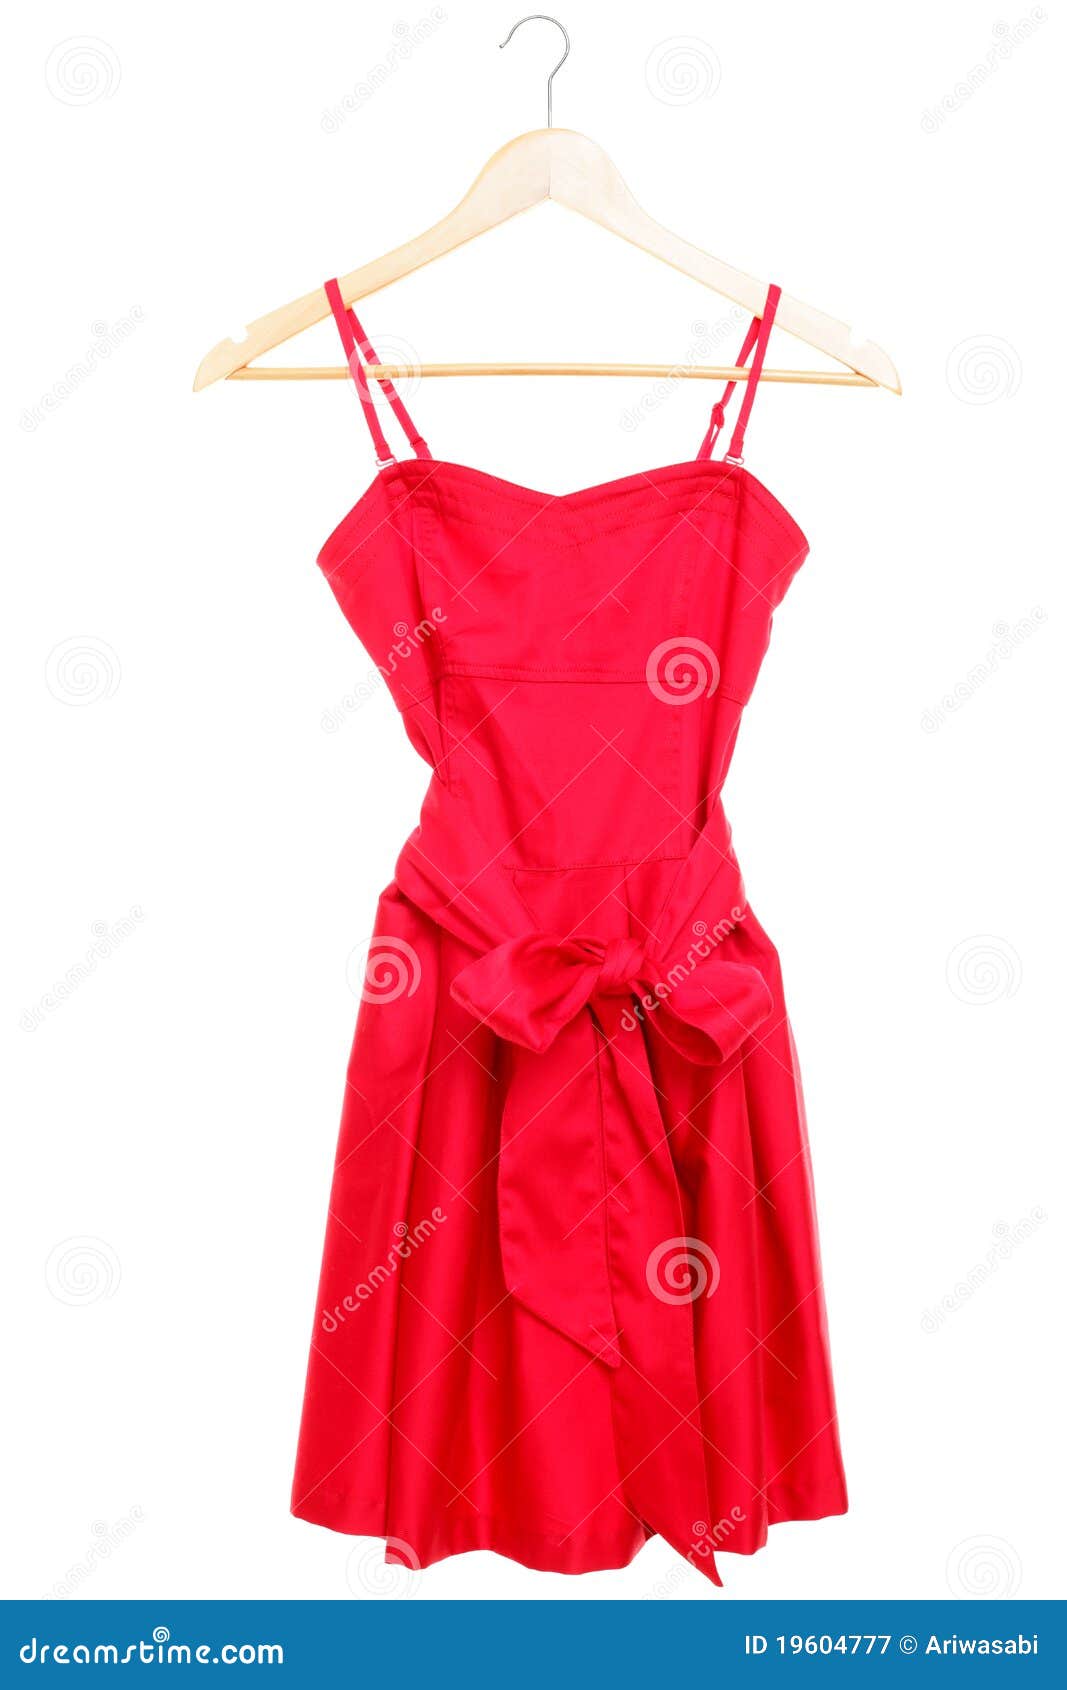 Red Dress On Hanger Isolated Royalty Free Stock Photography - Image ...